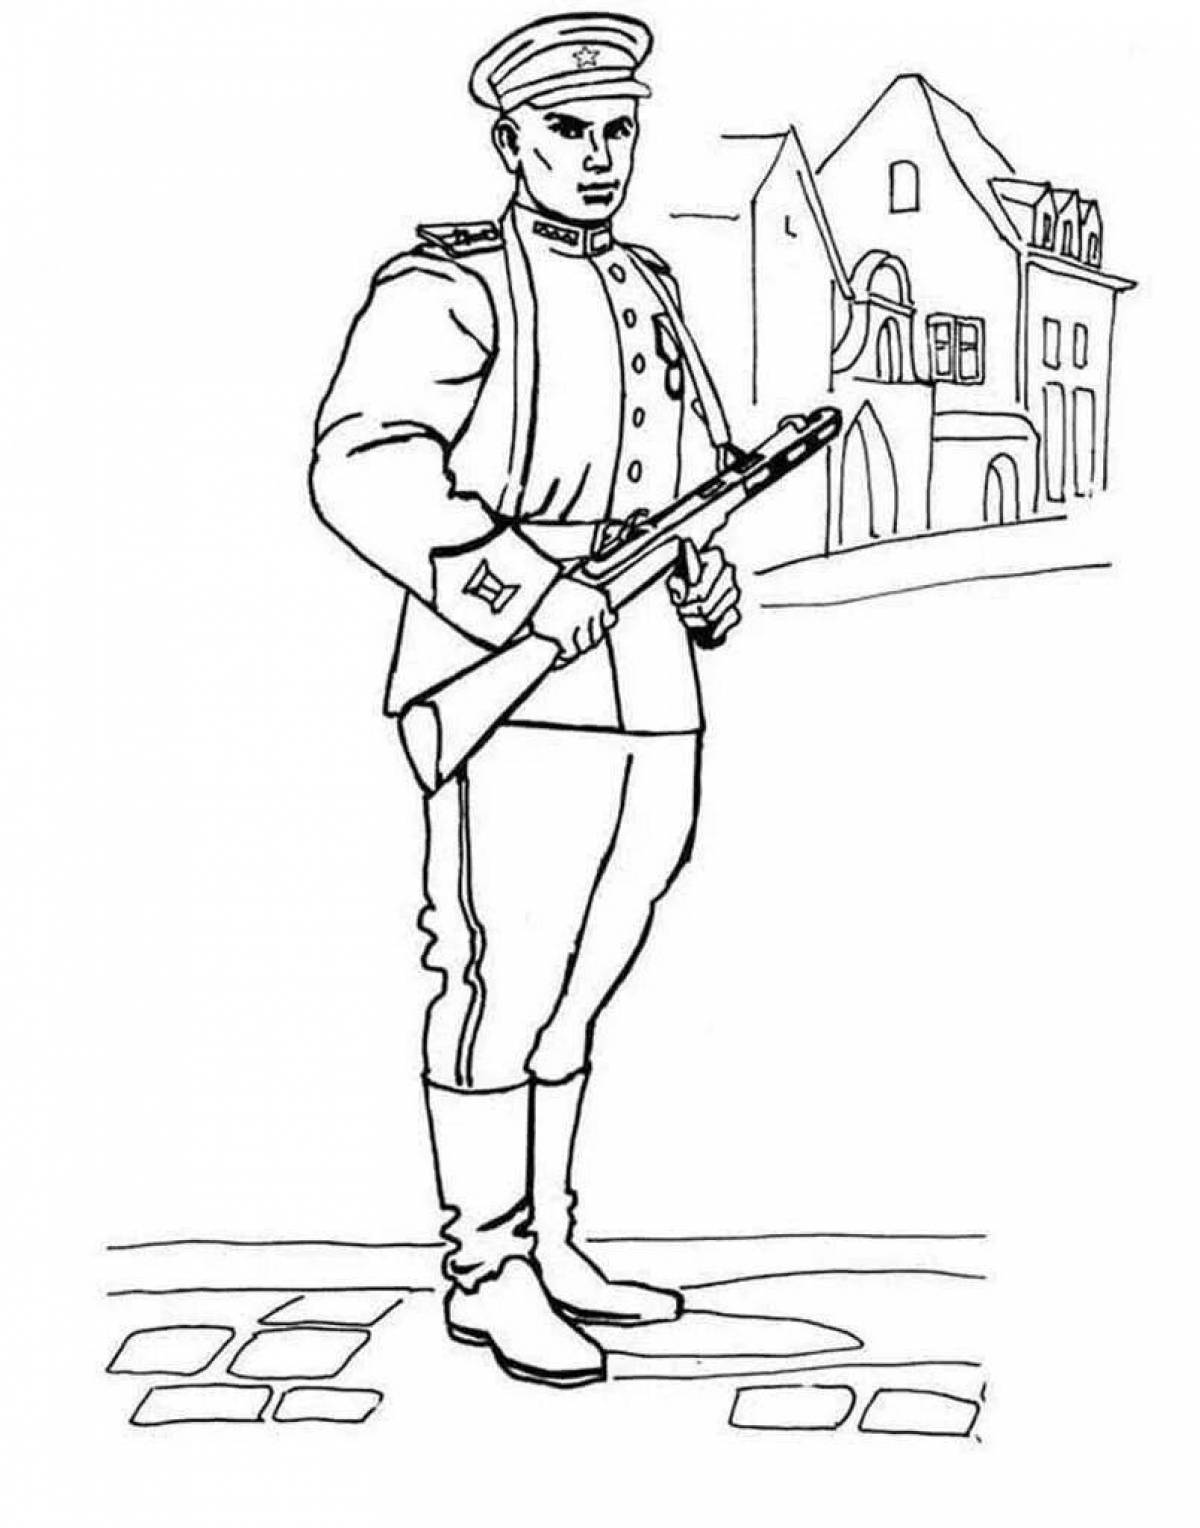 Magic Russian soldier coloring pages for kids